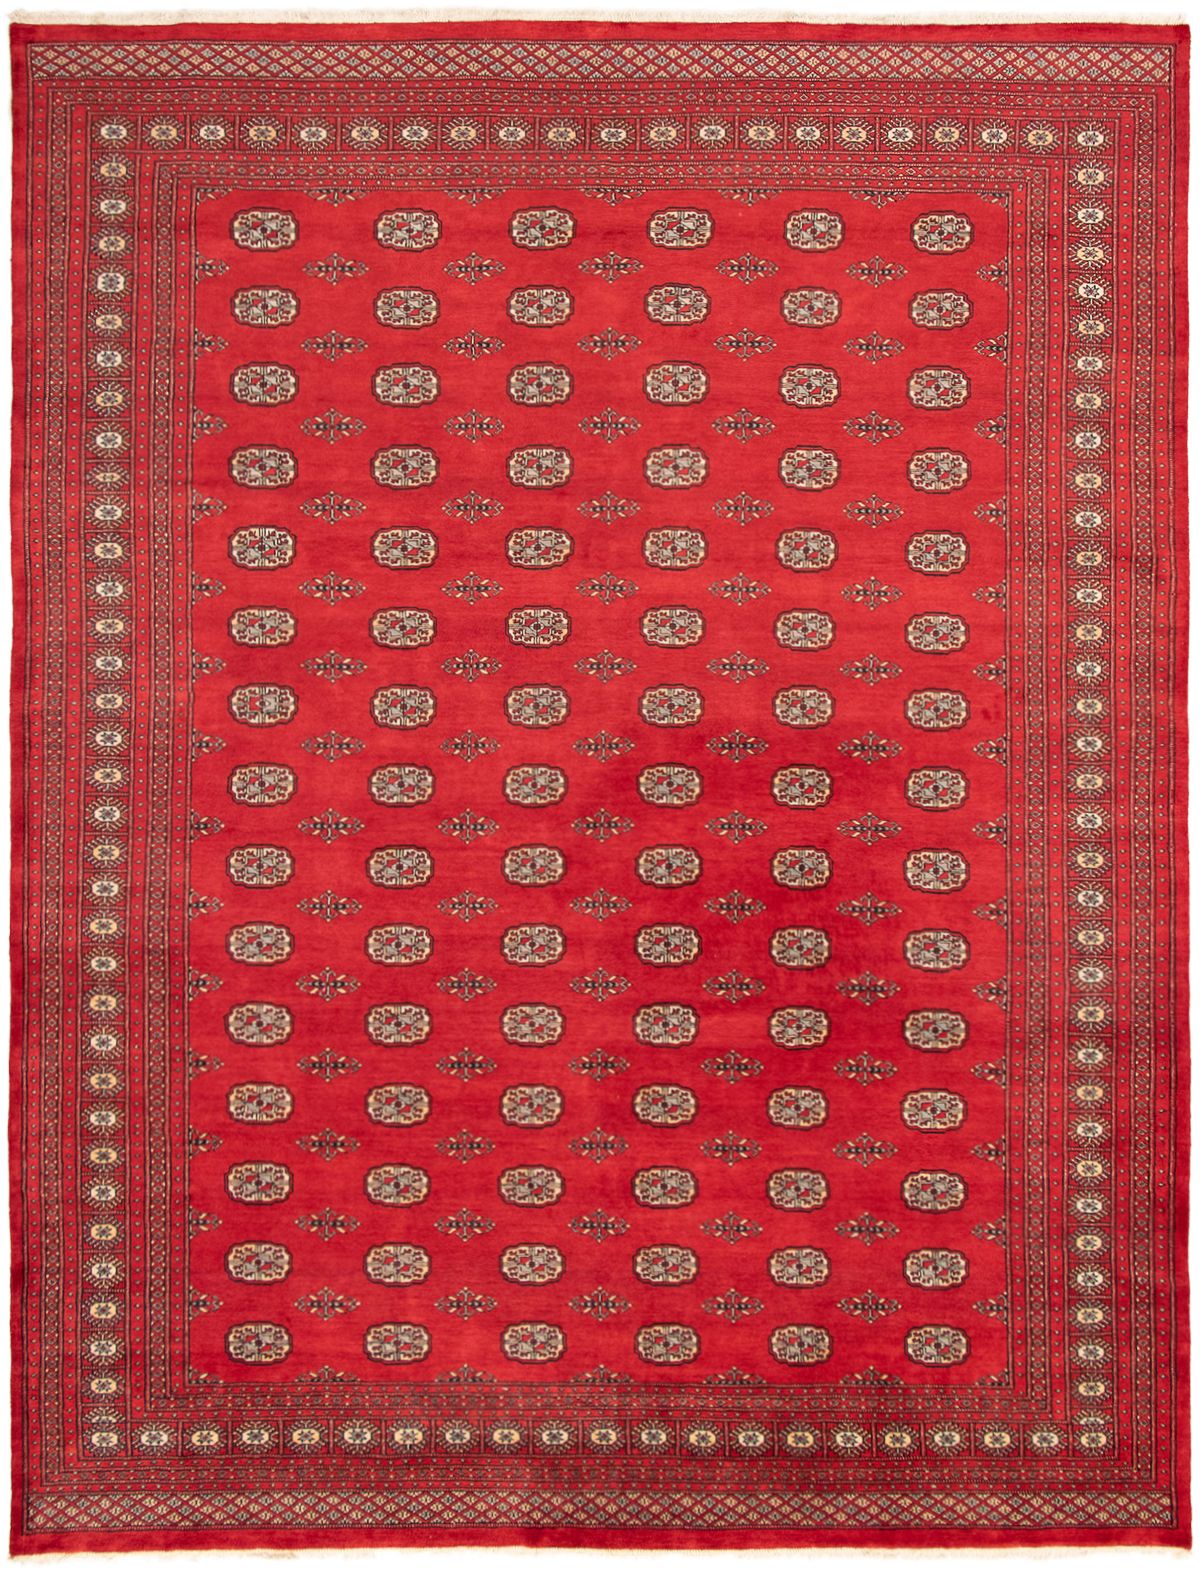 Hand-knotted Finest Peshawar Bokhara Red Wool Rug 8'0" x 10'2"  Size: 8'0" x 10'2"  